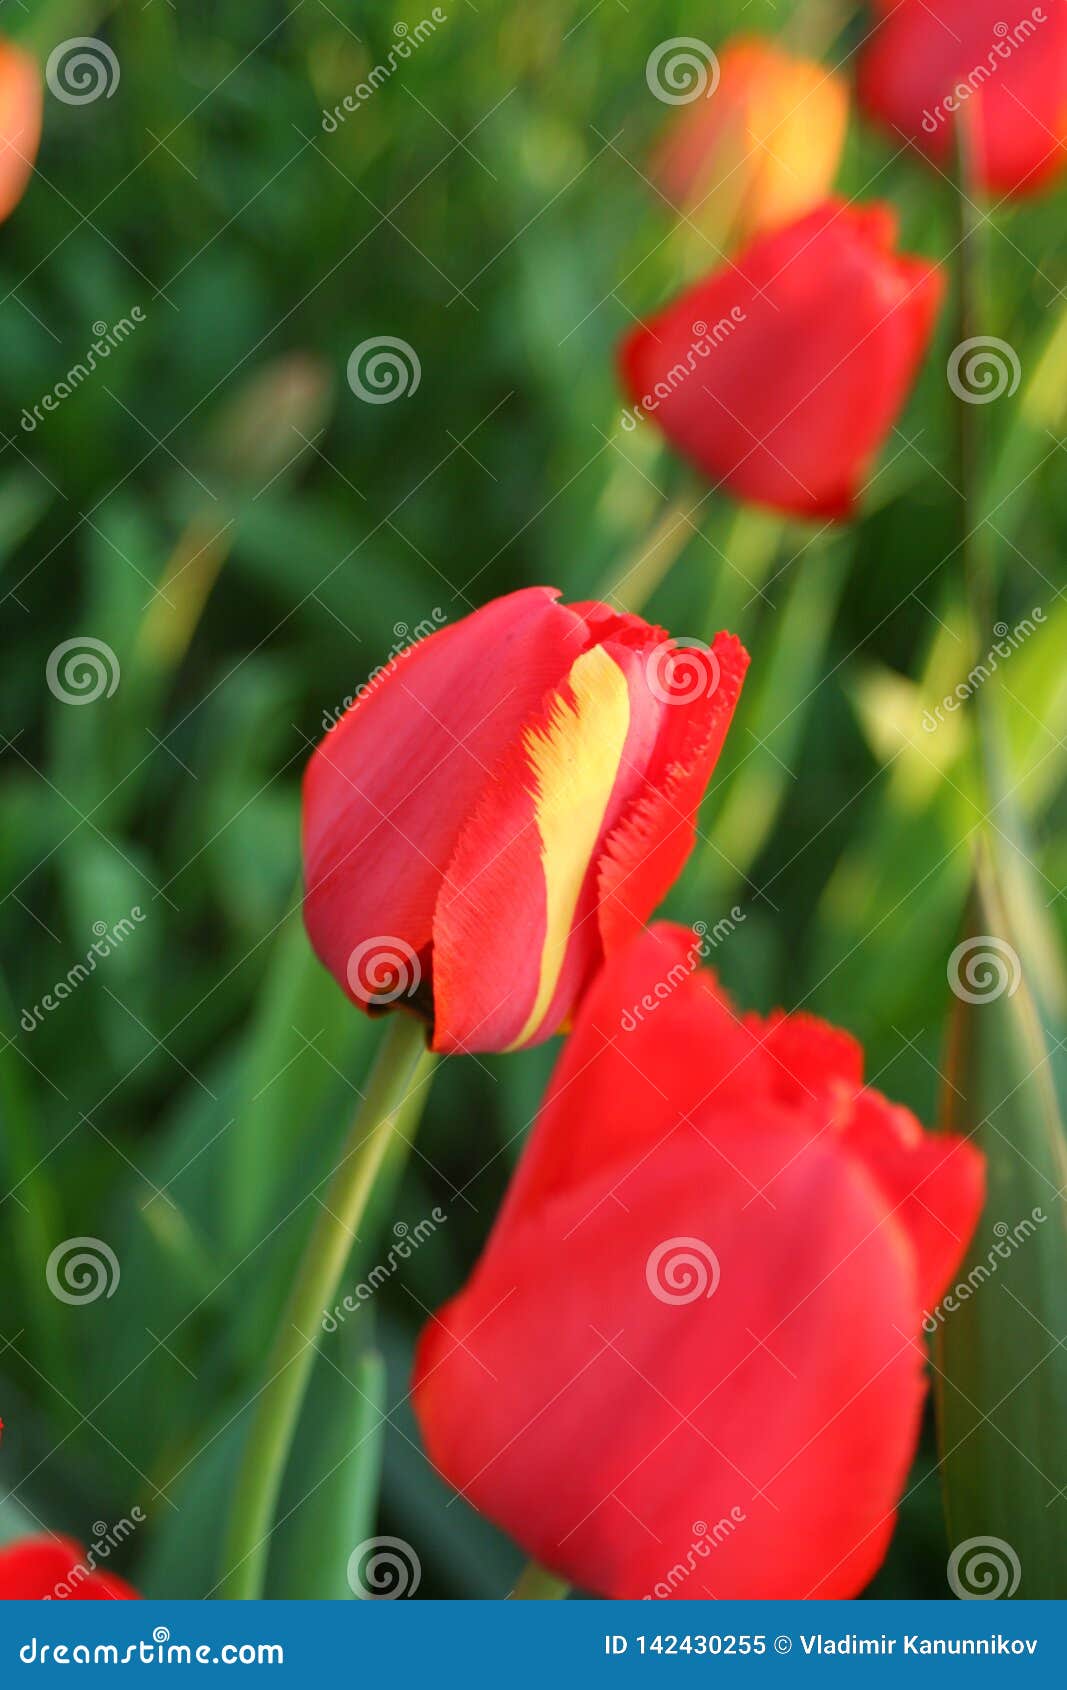 Red Tulip With Red And Yellow Petal Stock Image - Image of ...